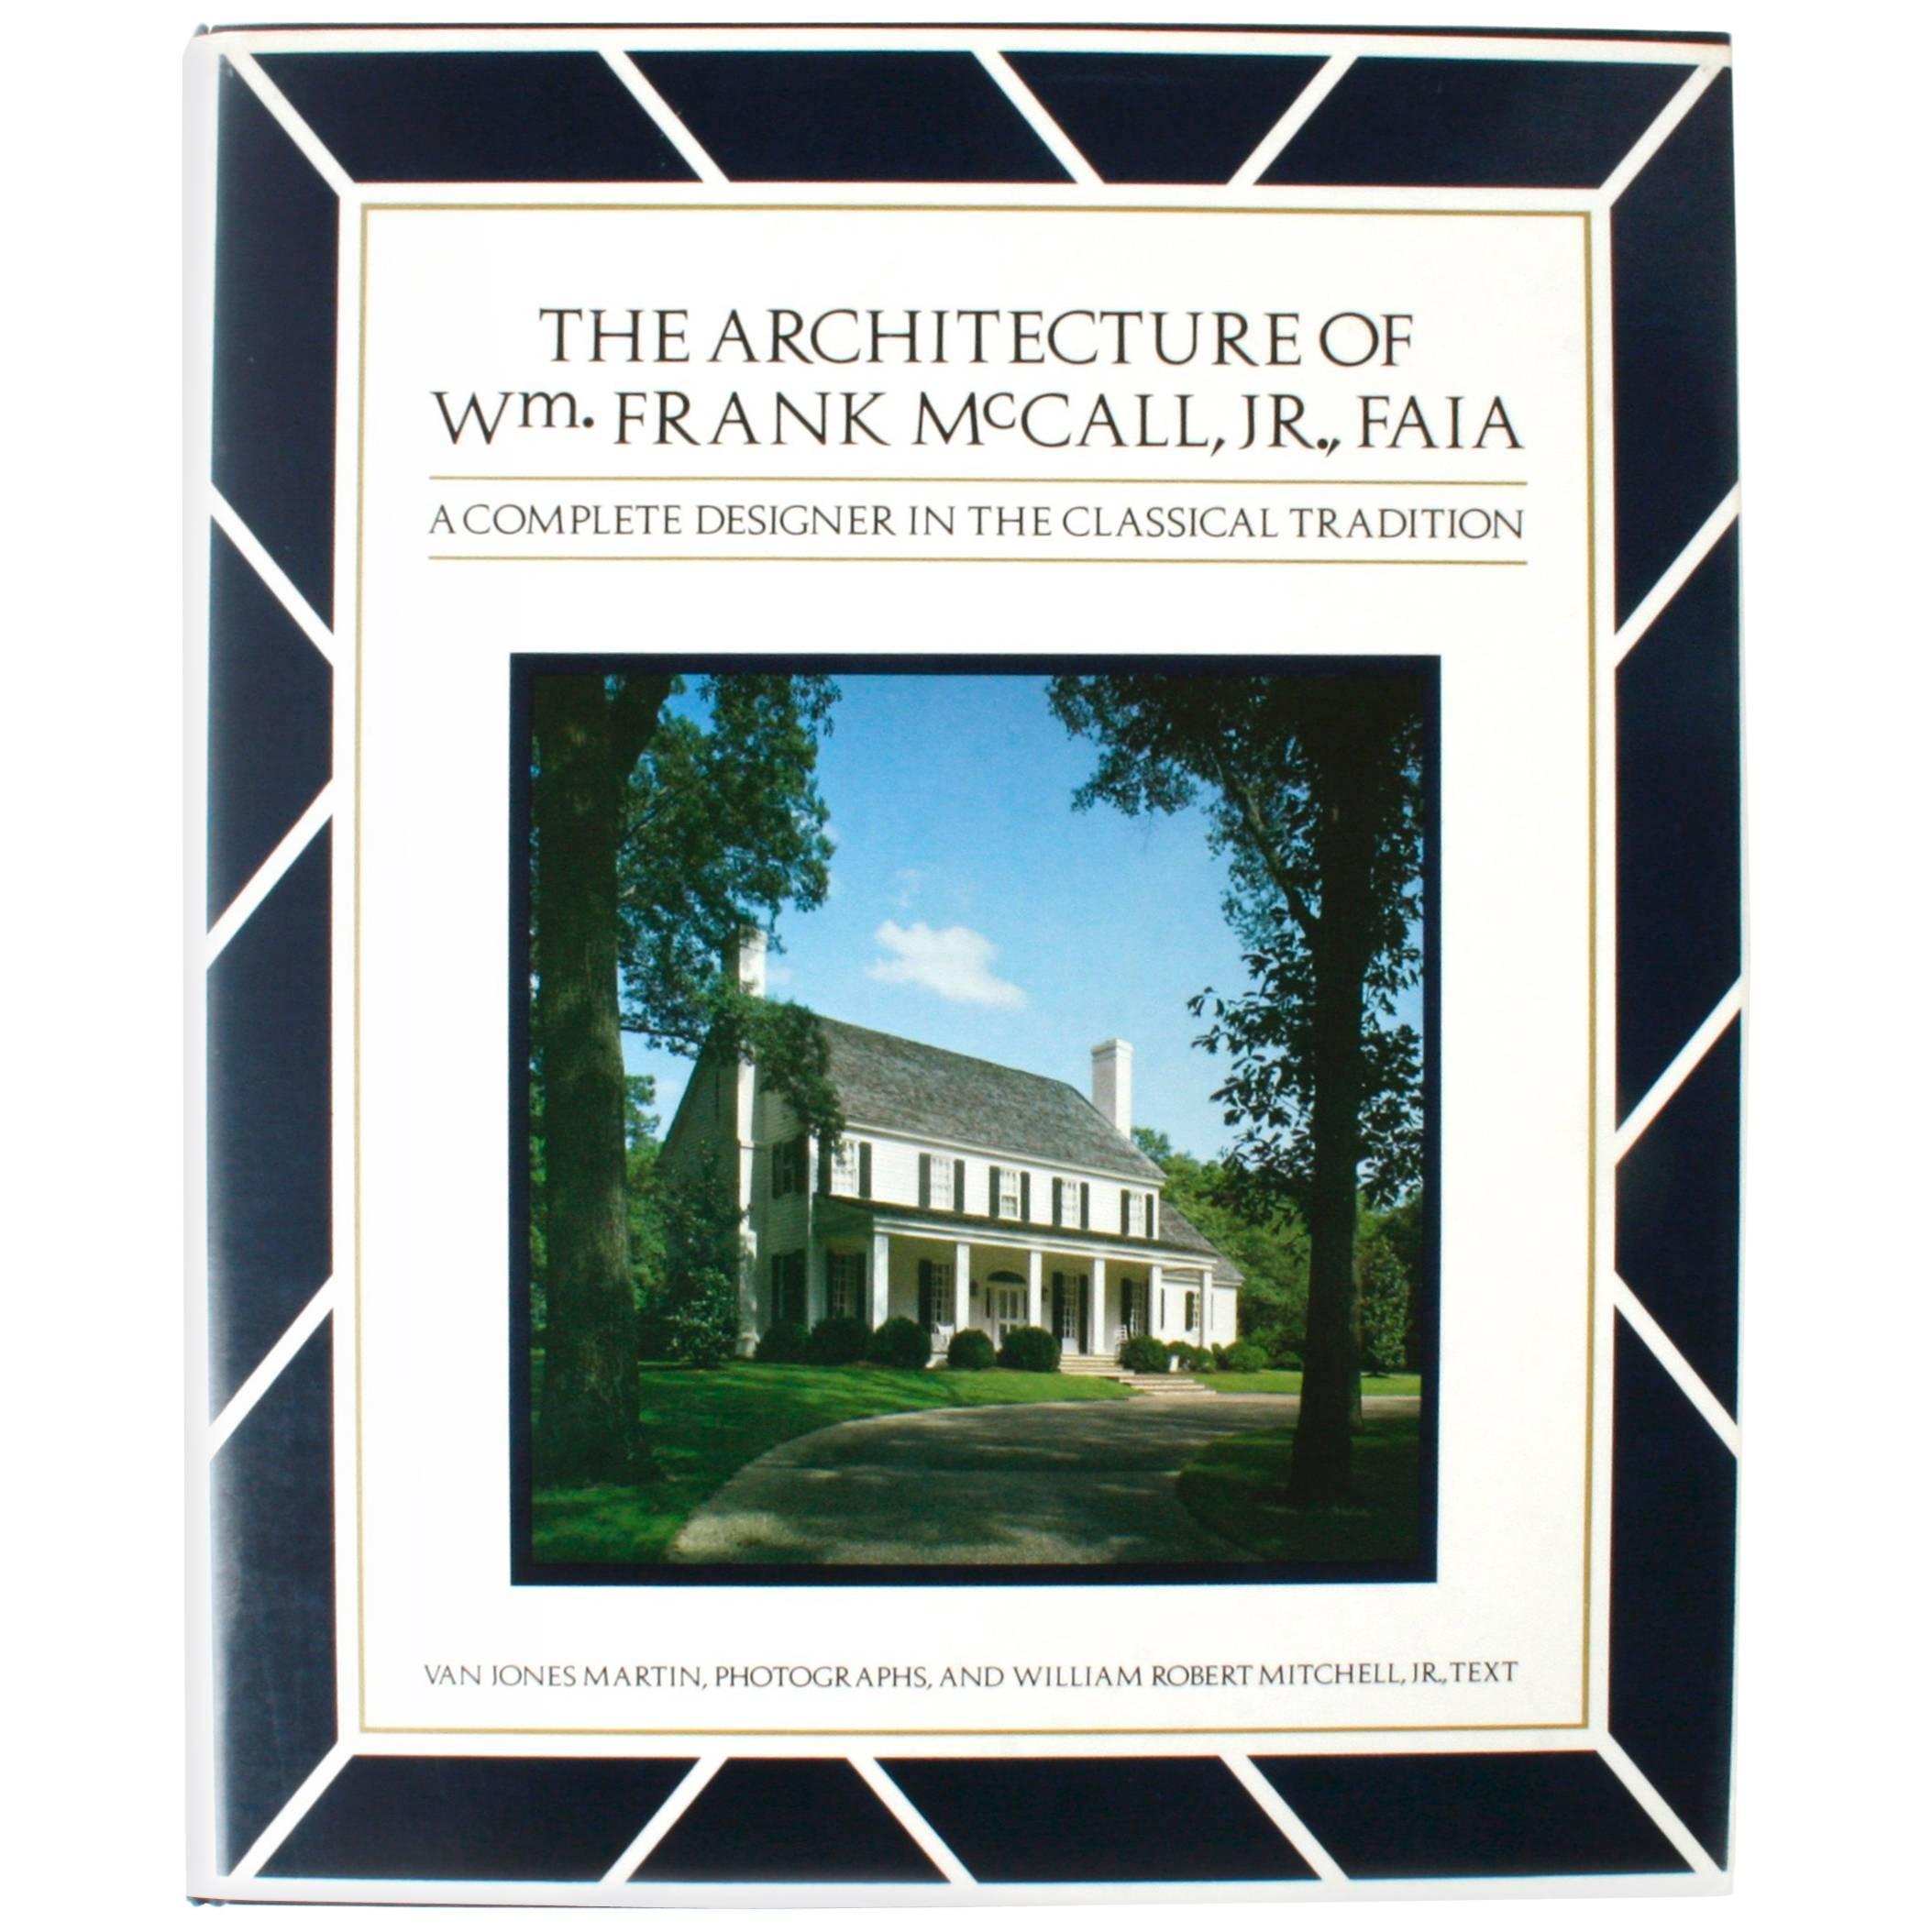 Architecture of Wm. Frank McCall Jr., First Printing